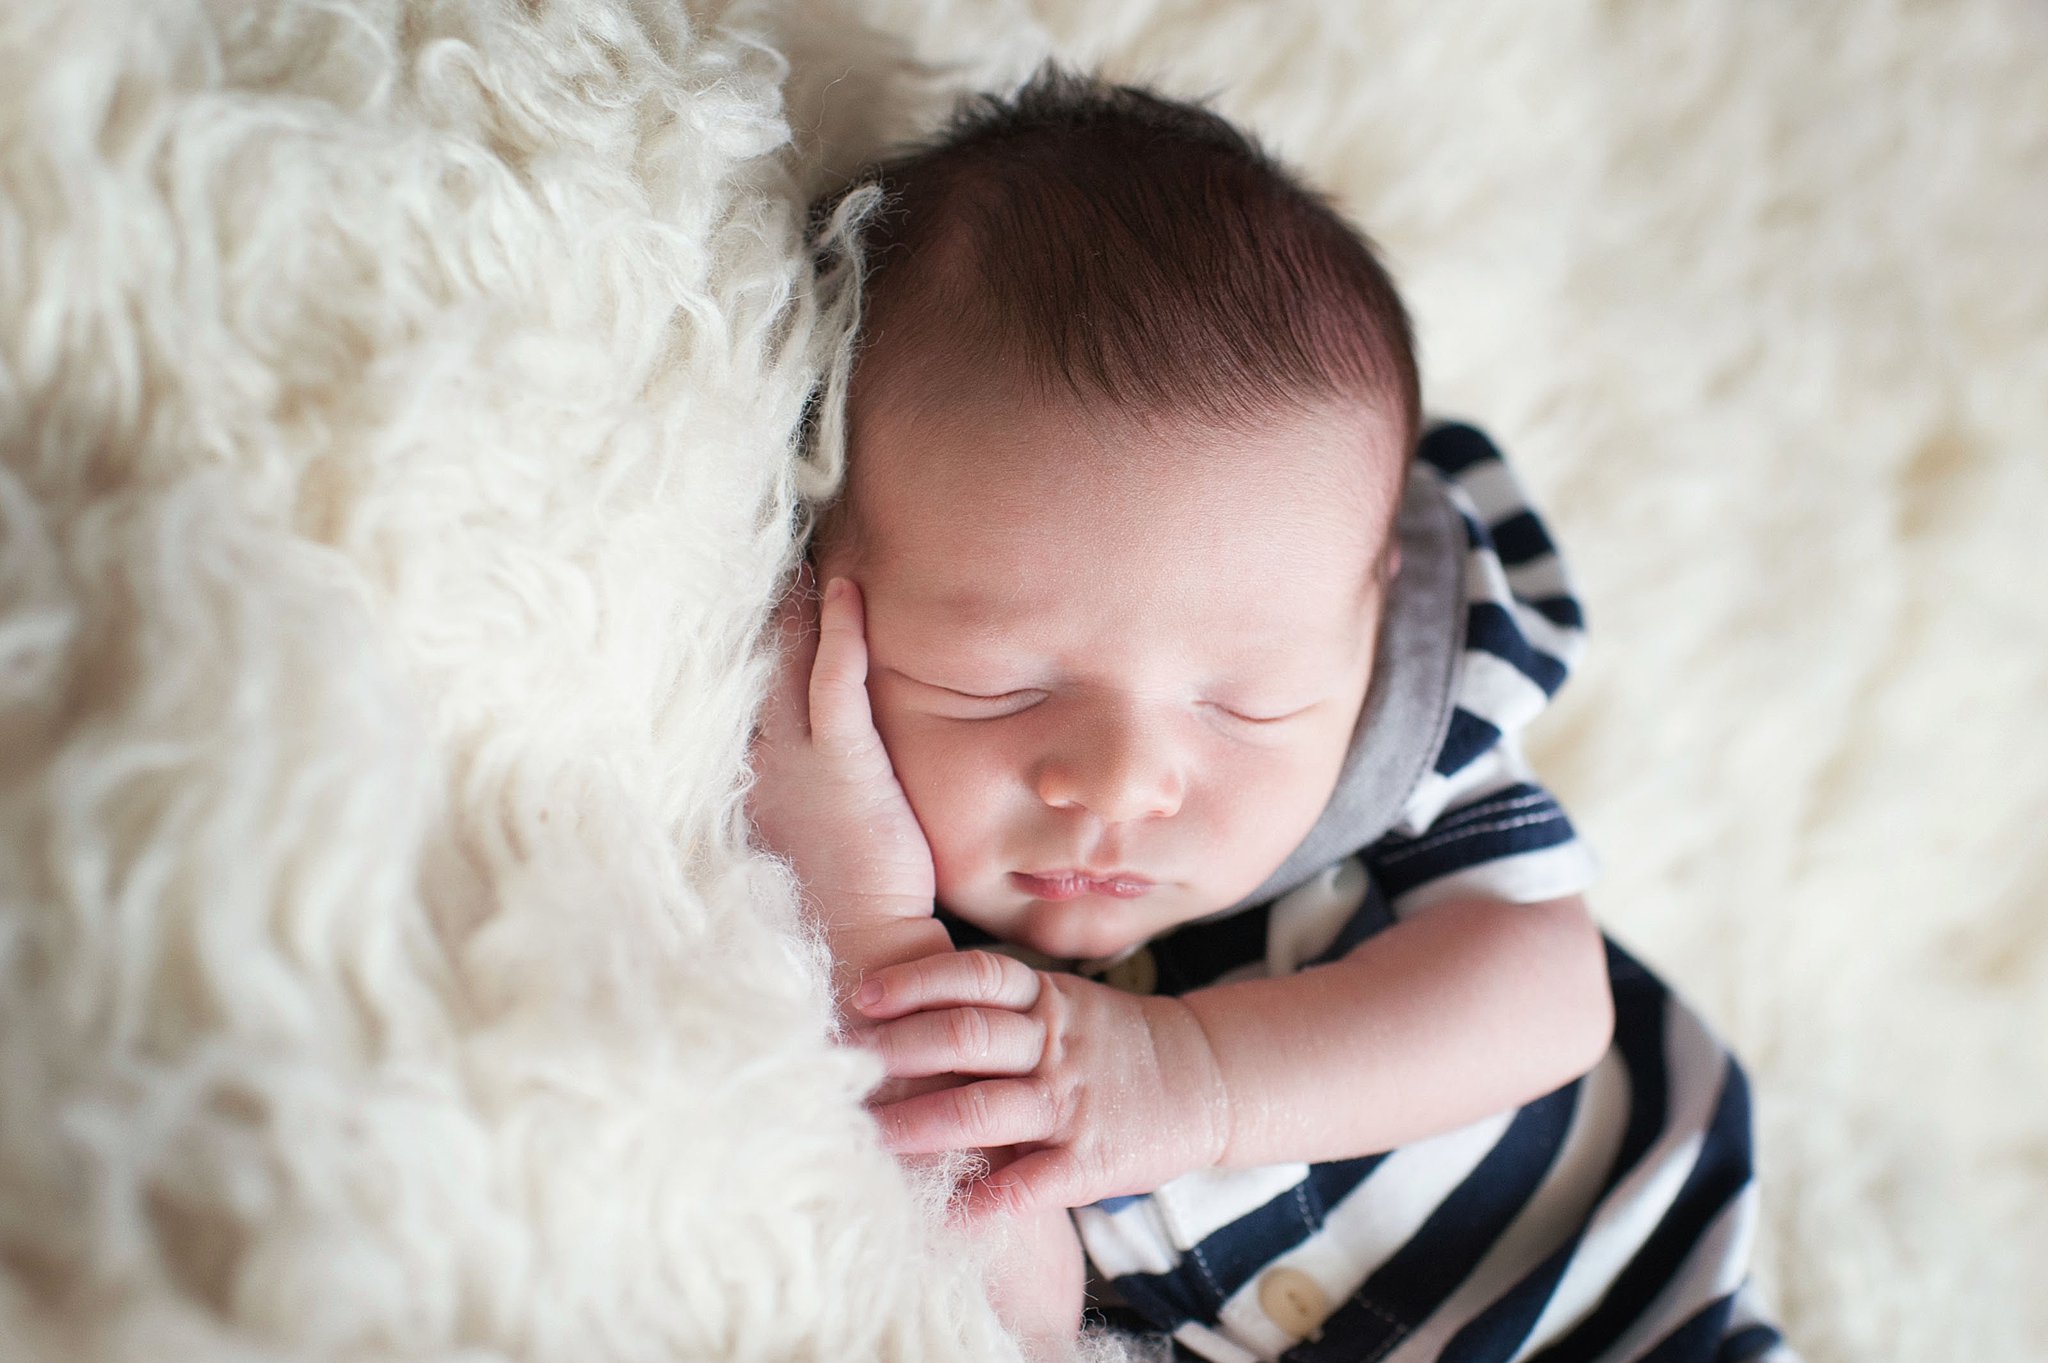 A newborn baby sleeps in a stripe onesie on a fur bed thanks to Colorado Mountain Doulas